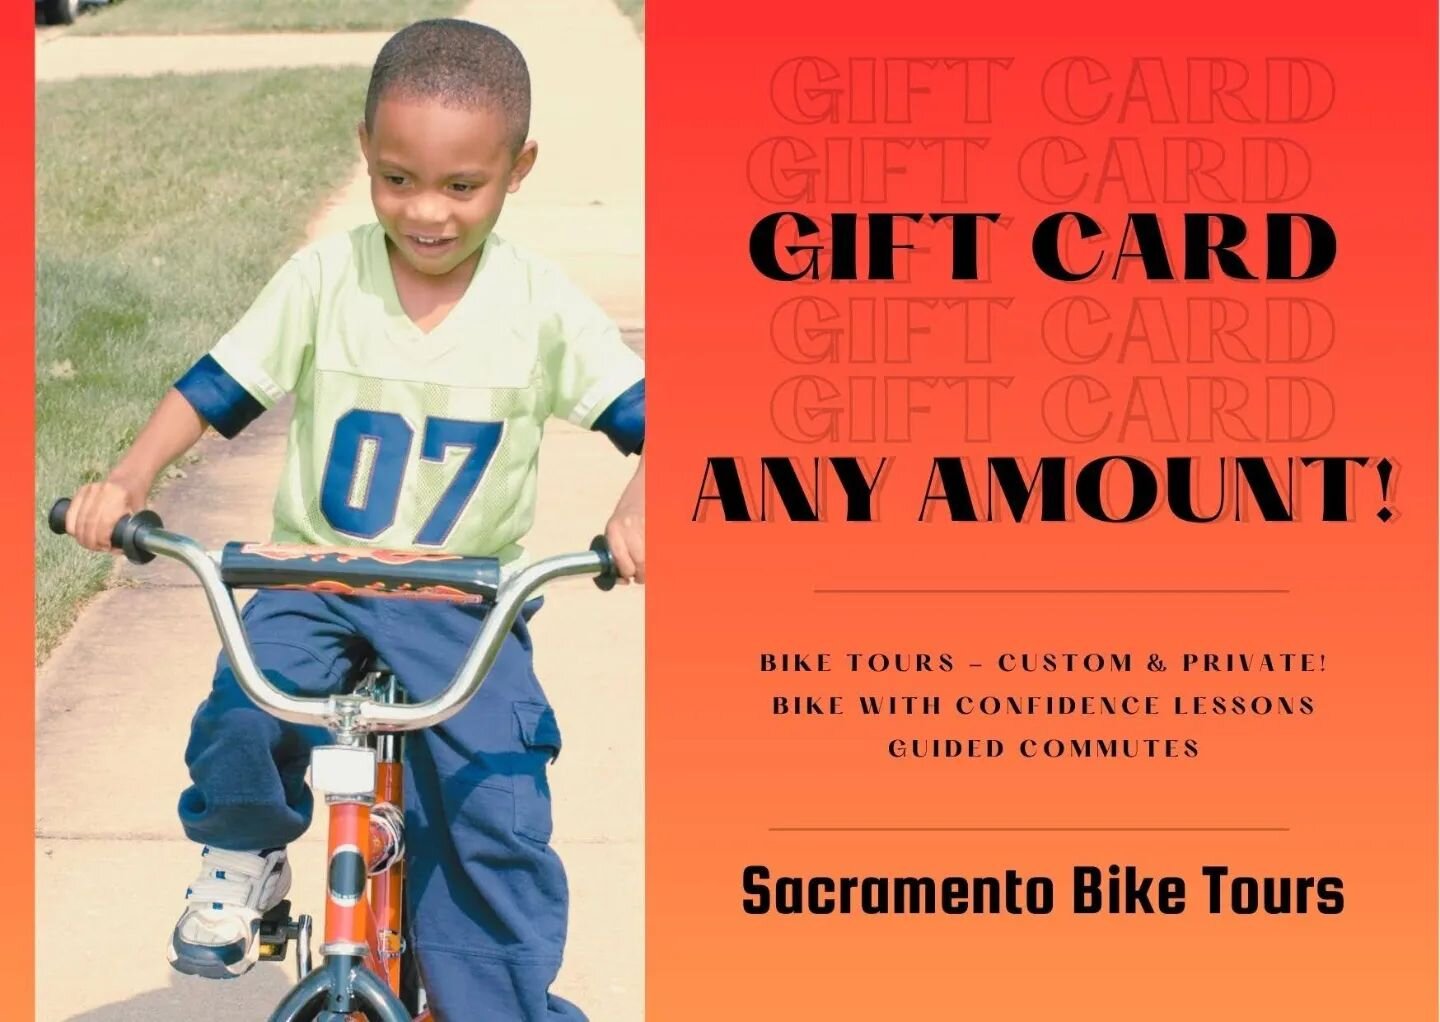 Happy Black Friday! Give yourself or your loved one or your enemy the gift of riding a bike this holiday season :)
.
We offer private bike tours of Sacramento and the American River Parkway, as well as private lessons for those wanting to learn to ri